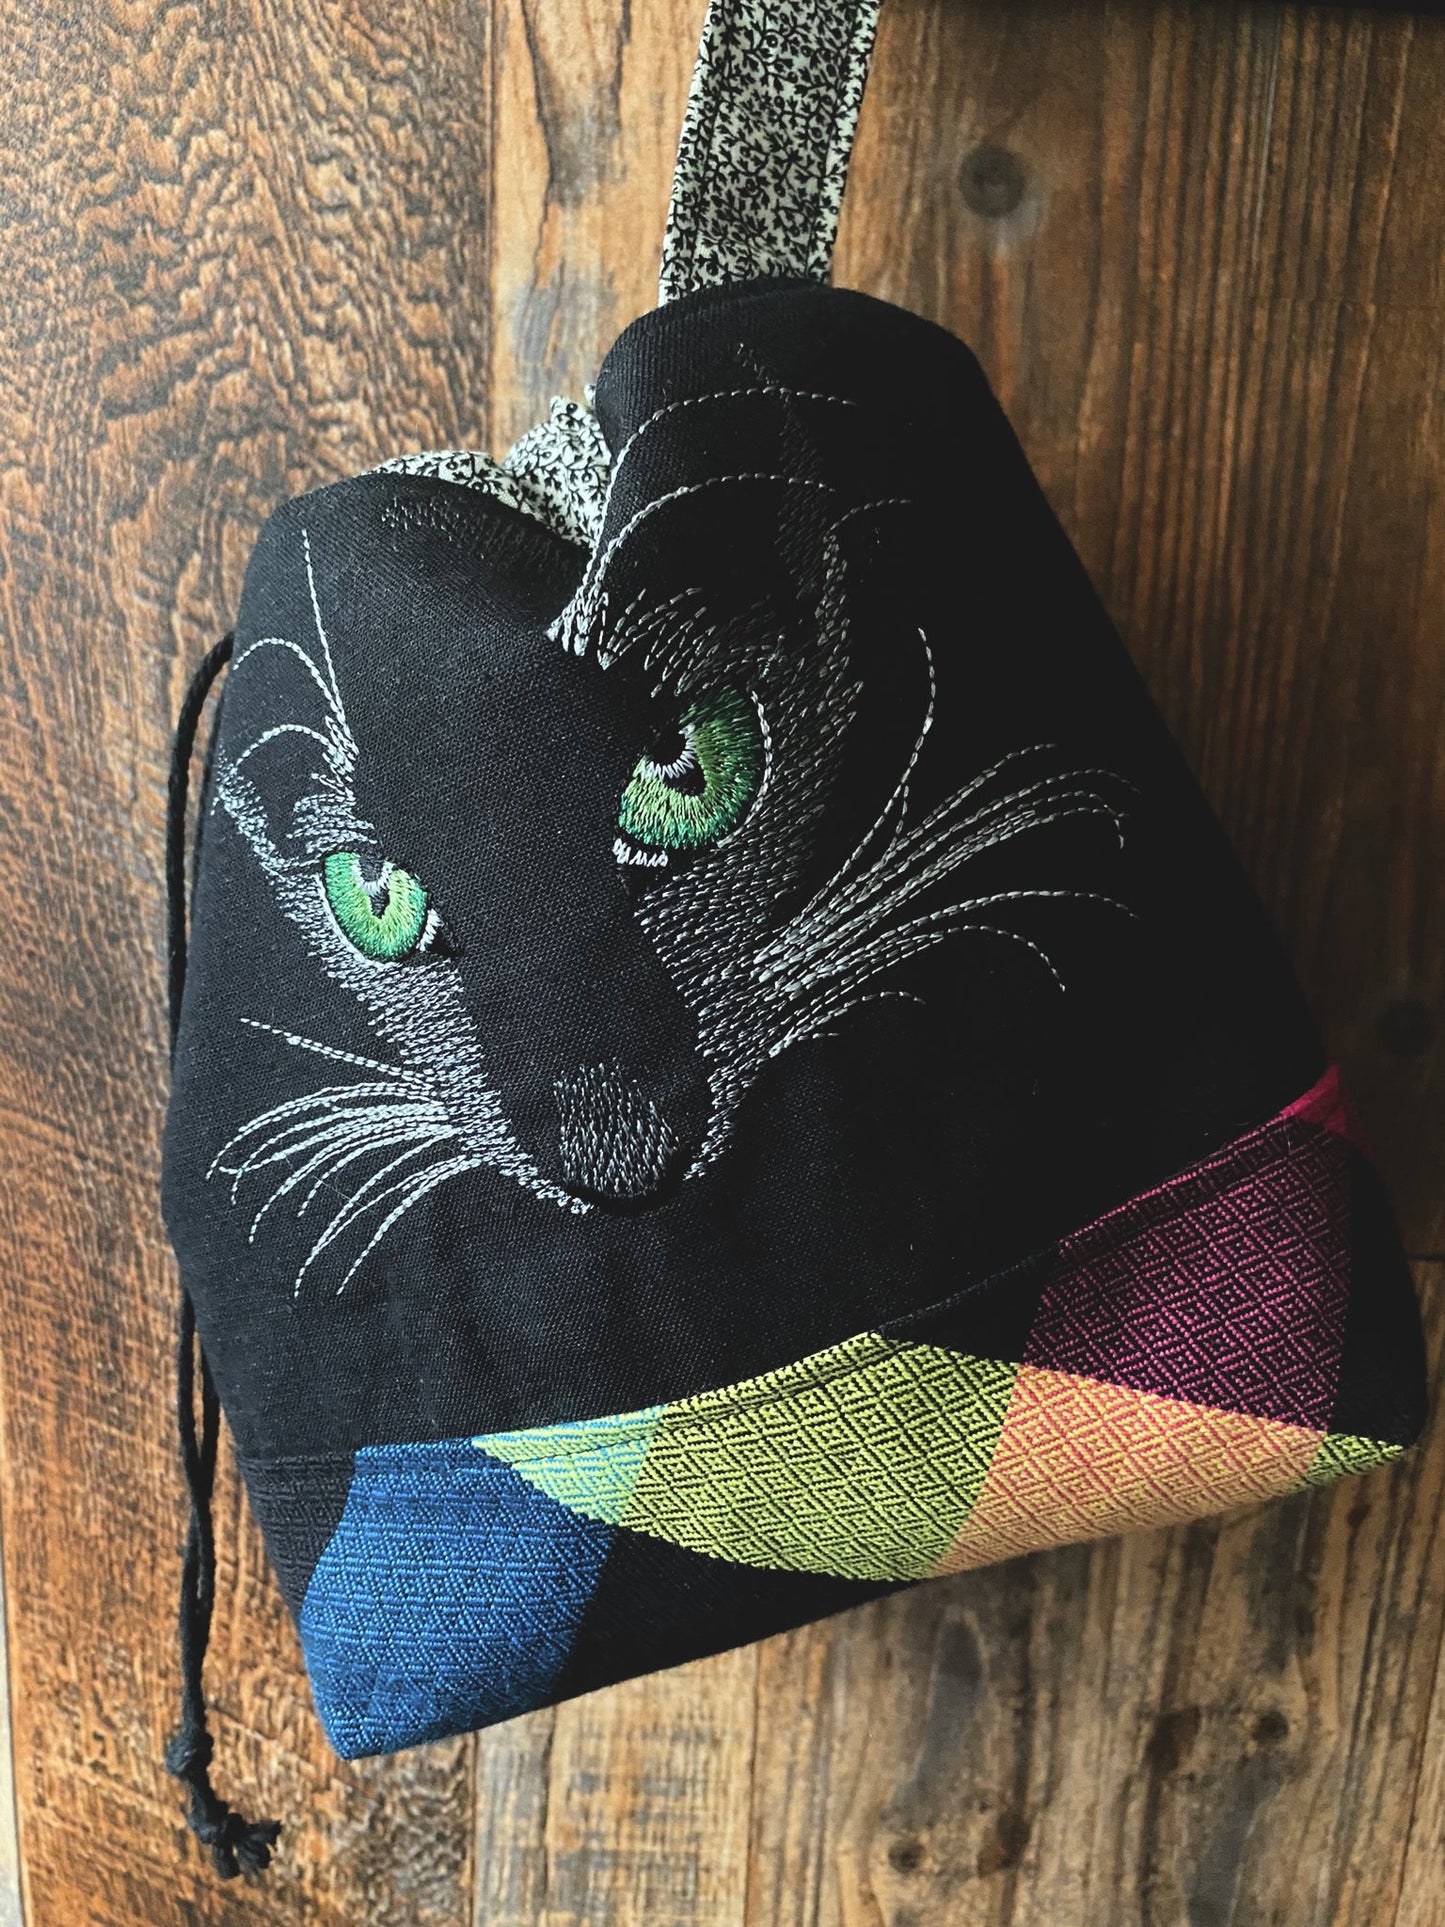 Void Kitty Drawstring Project Bag